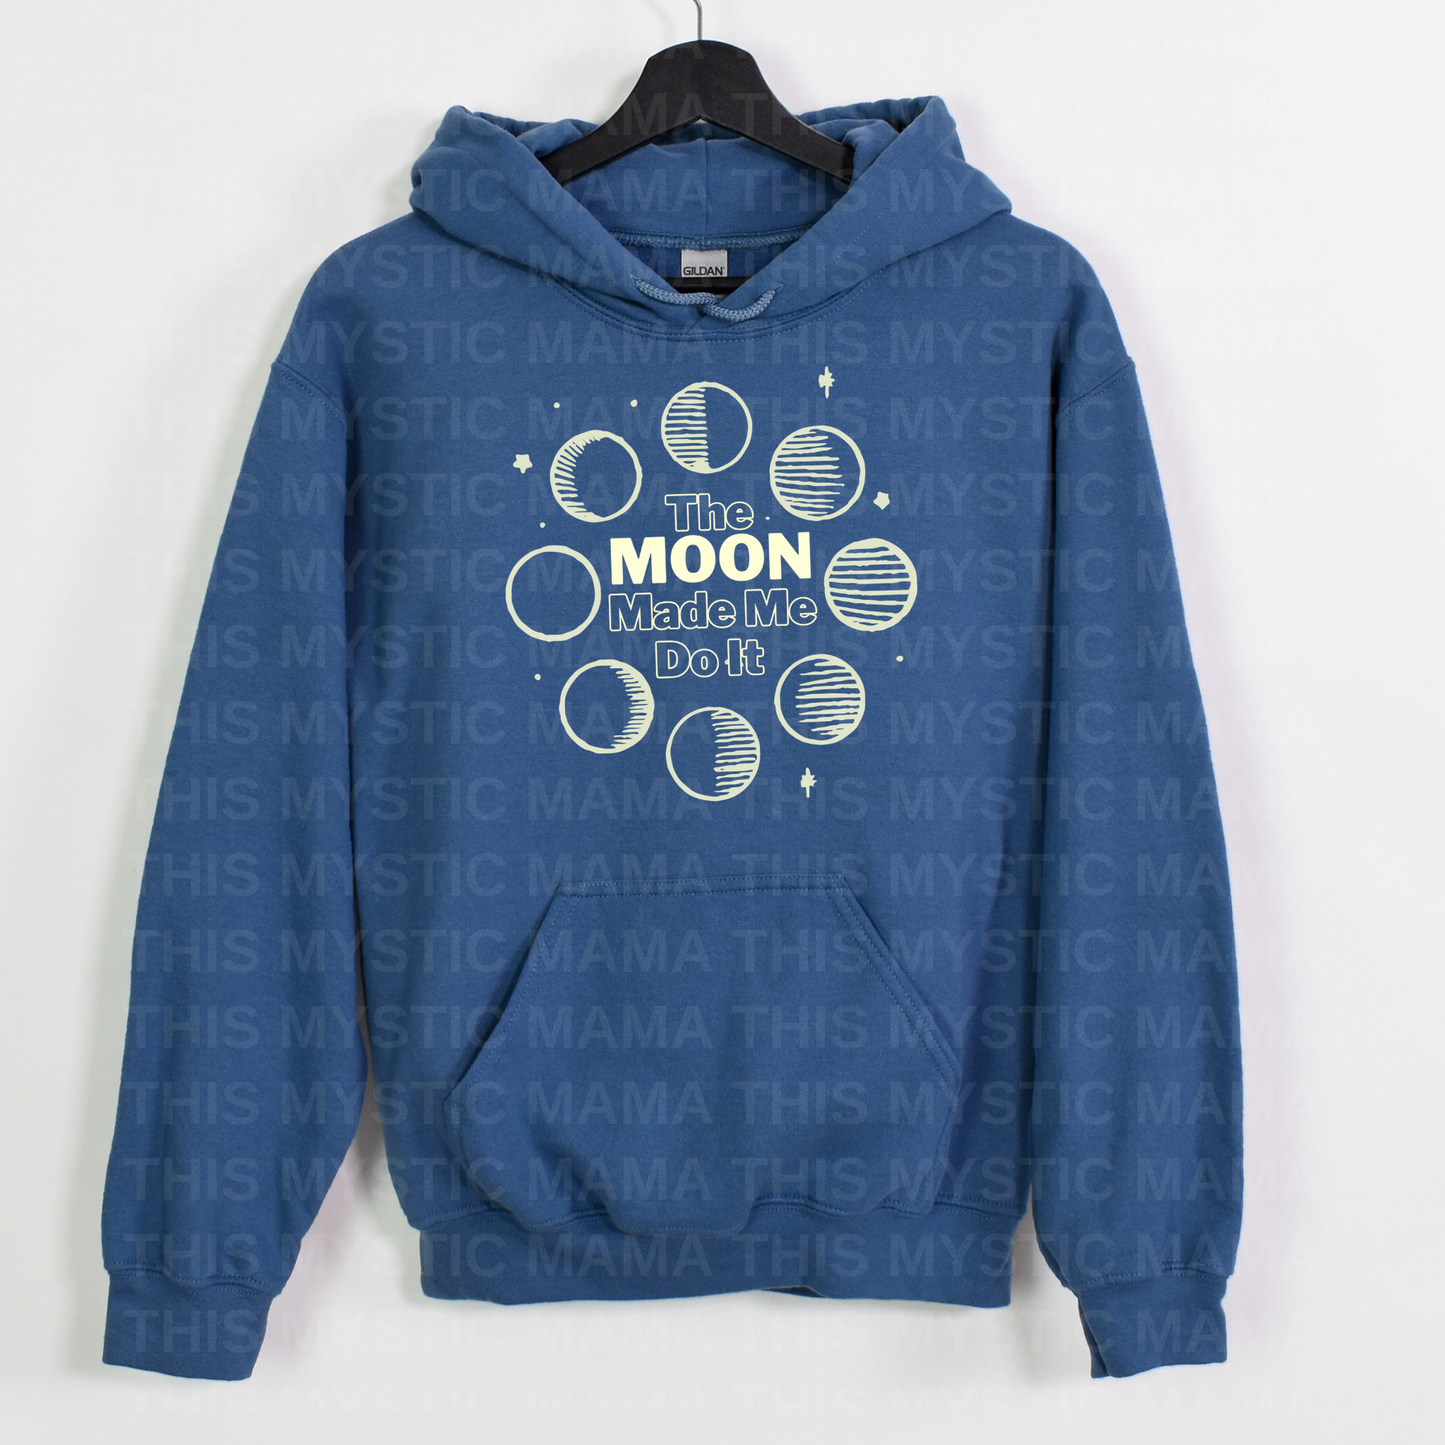 "The Moon Made Me Do It" Lunar-Inspired Hoodie